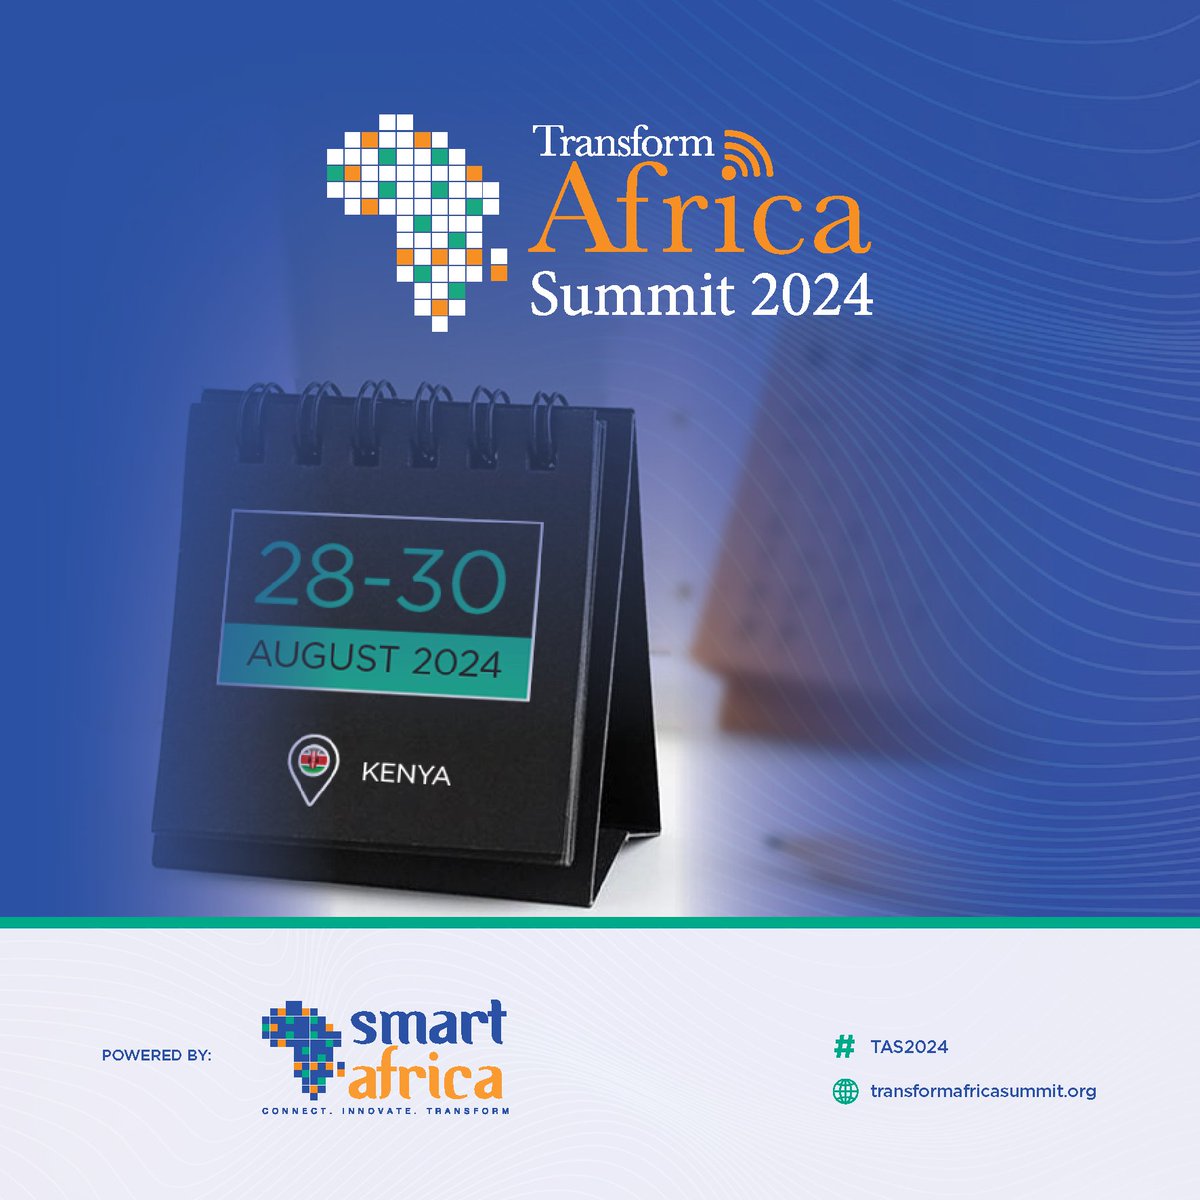 Smart Africa is excited to announce that the Republic of #Kenya will host the 7th edition of the Transform Africa Summit from August 28th - 30th, 2024. #TAS is the leading Africa tech & #digital event that gathers over 5000 delegates from more than 100 countries. @MoICTKenya